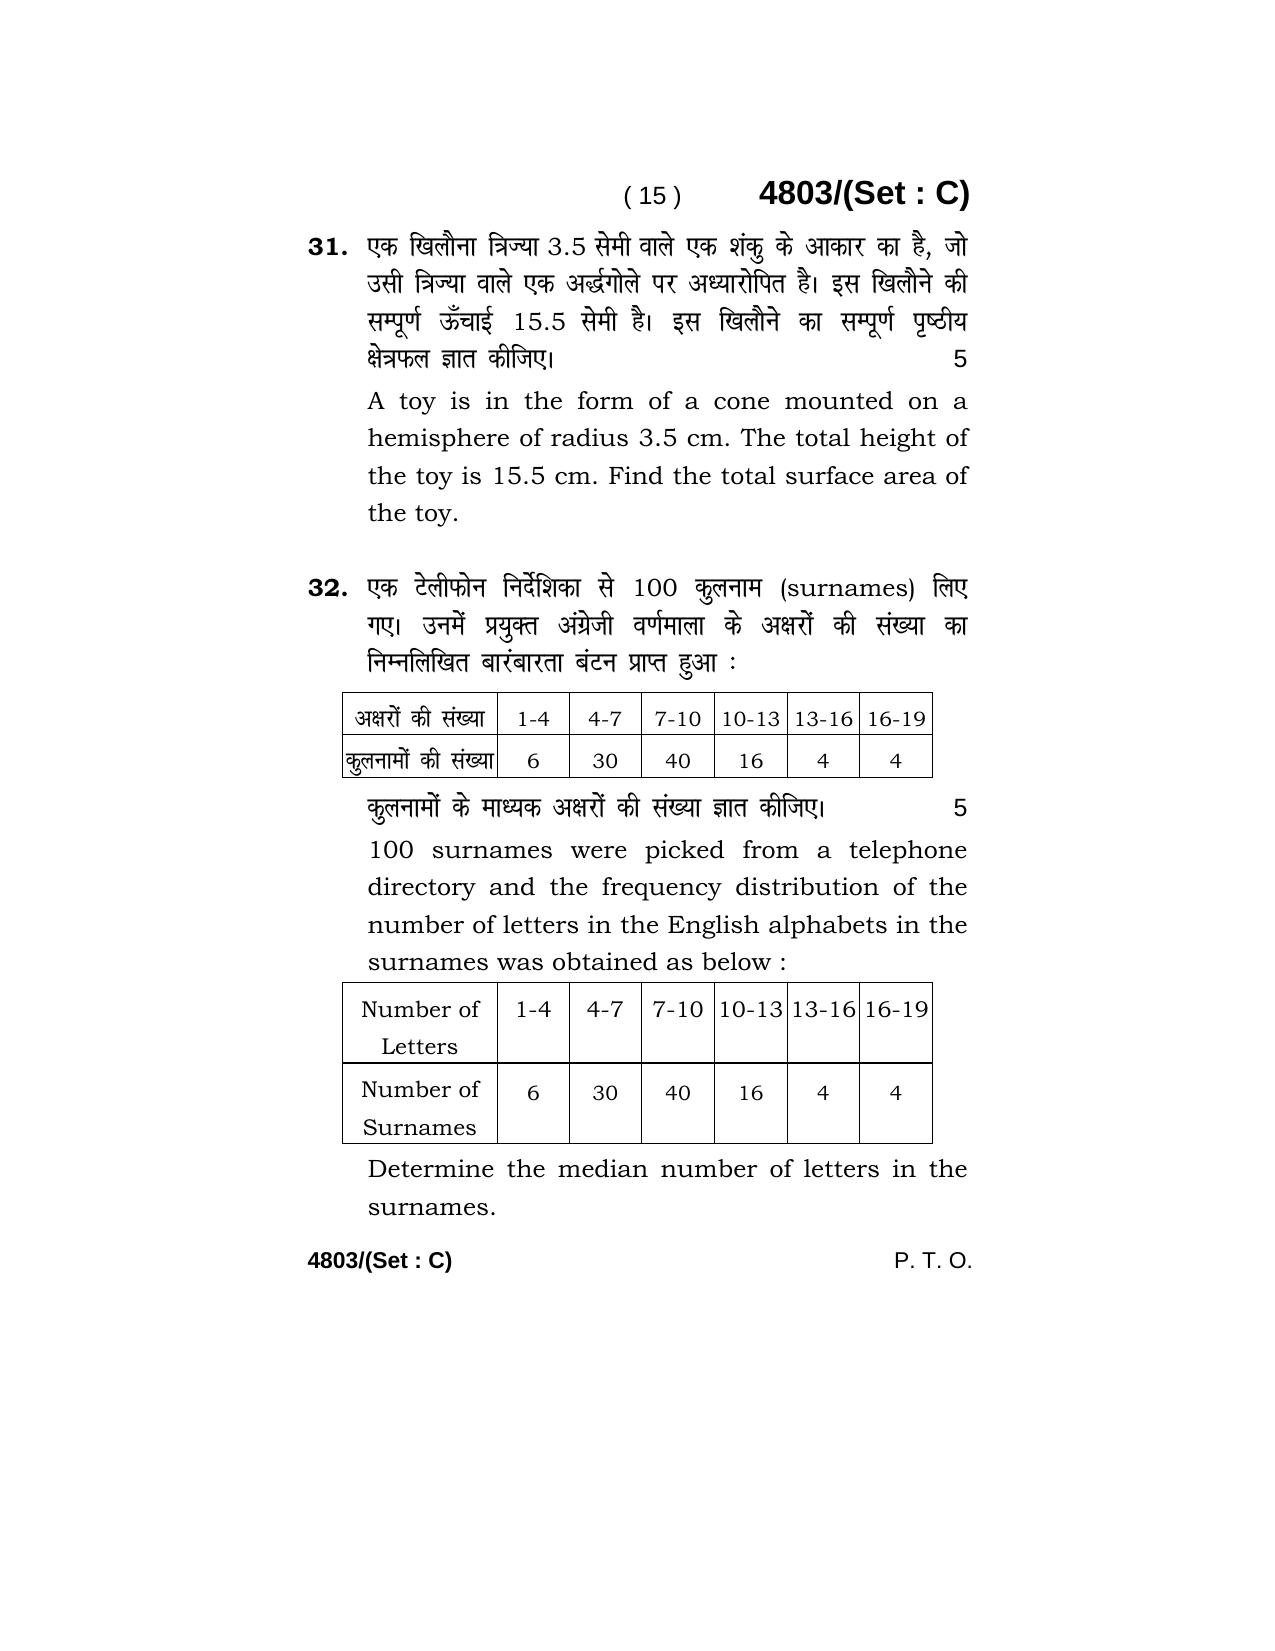 Haryana Board HBSE Class 10 Mathematics 2020 Question Paper - Page 47